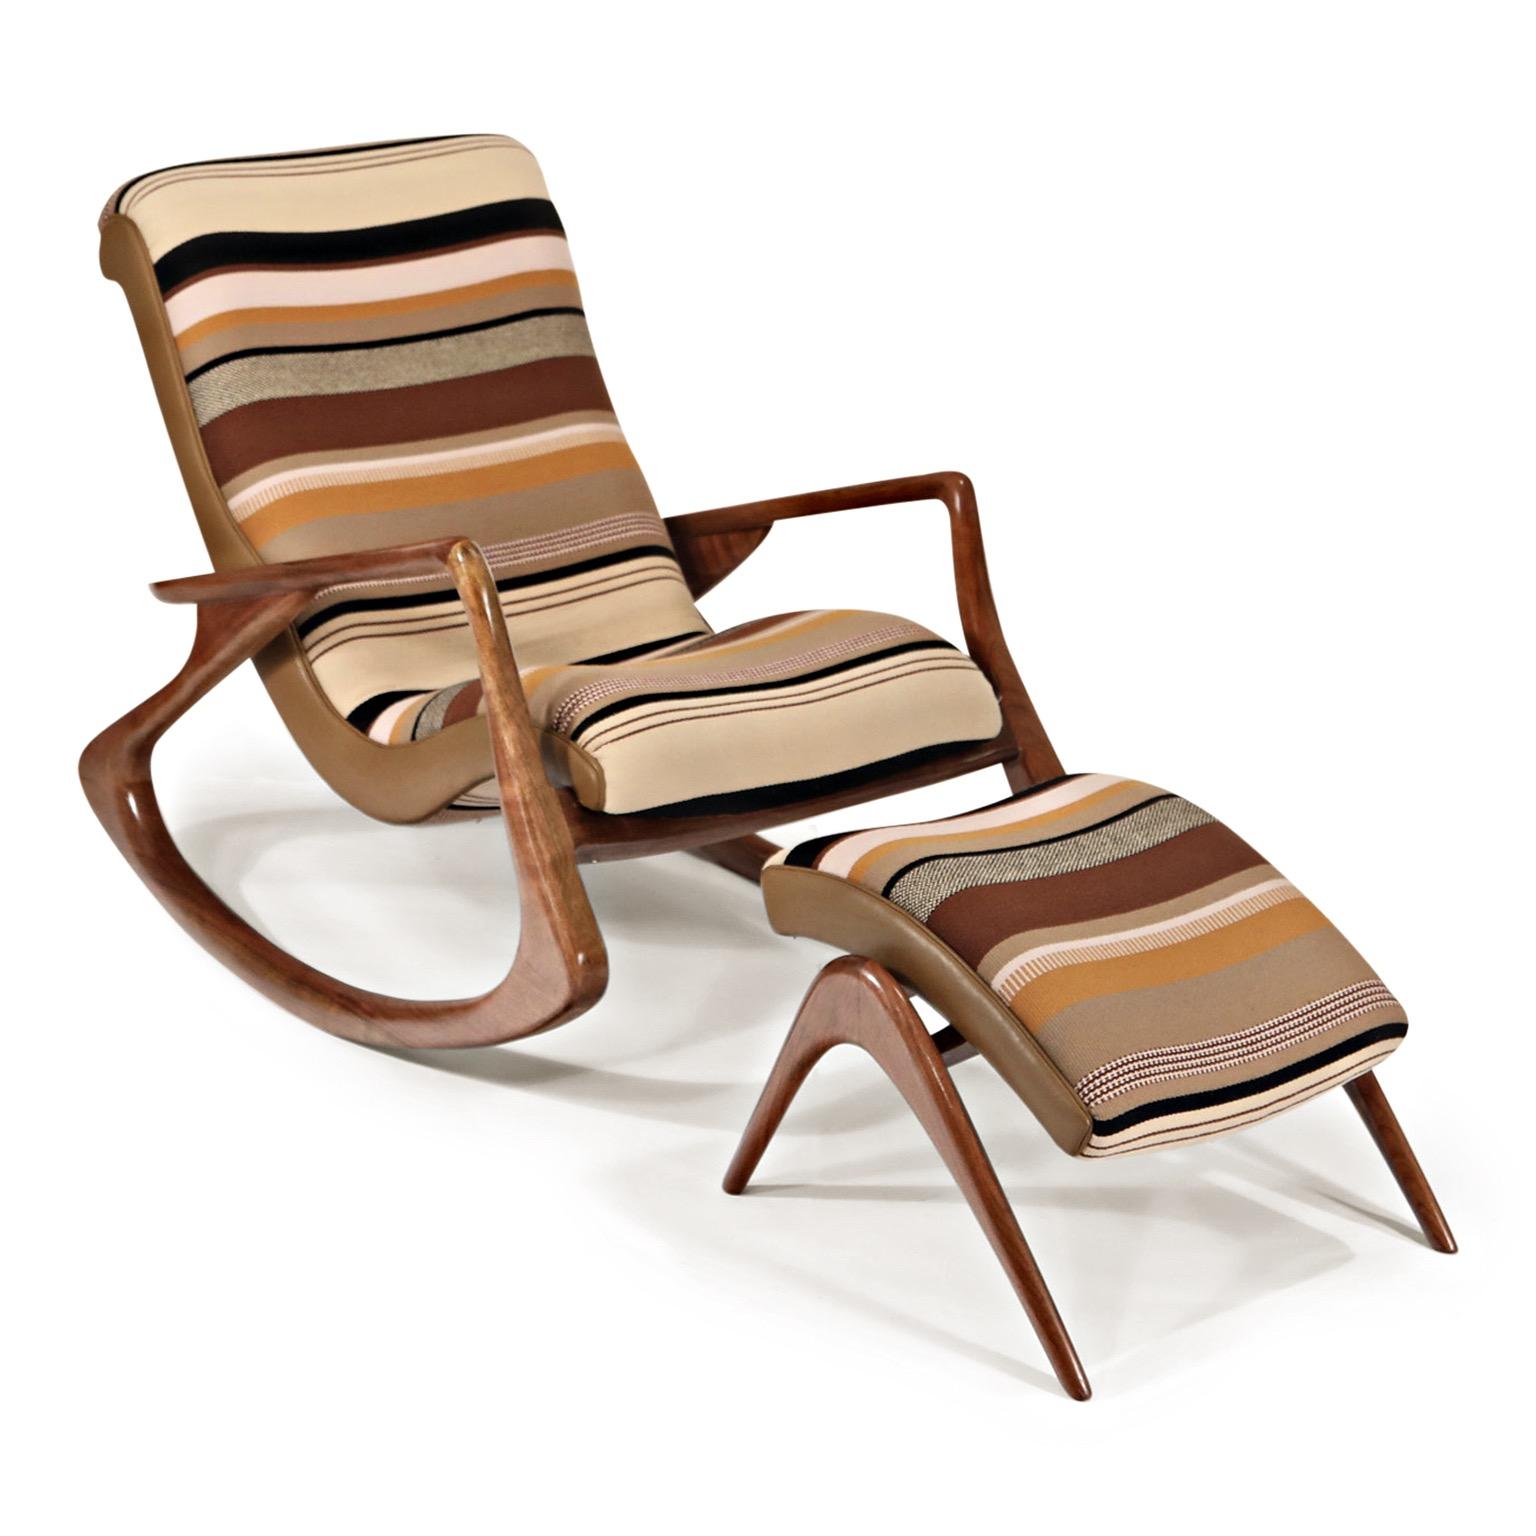 This incredible Vladimir Kagan contour rocking lounge chair and ottoman is as collectible as it is beautiful and a fine choice as an investment for collectors and an heirloom for generations. Both the chair and ottoman are signed with 